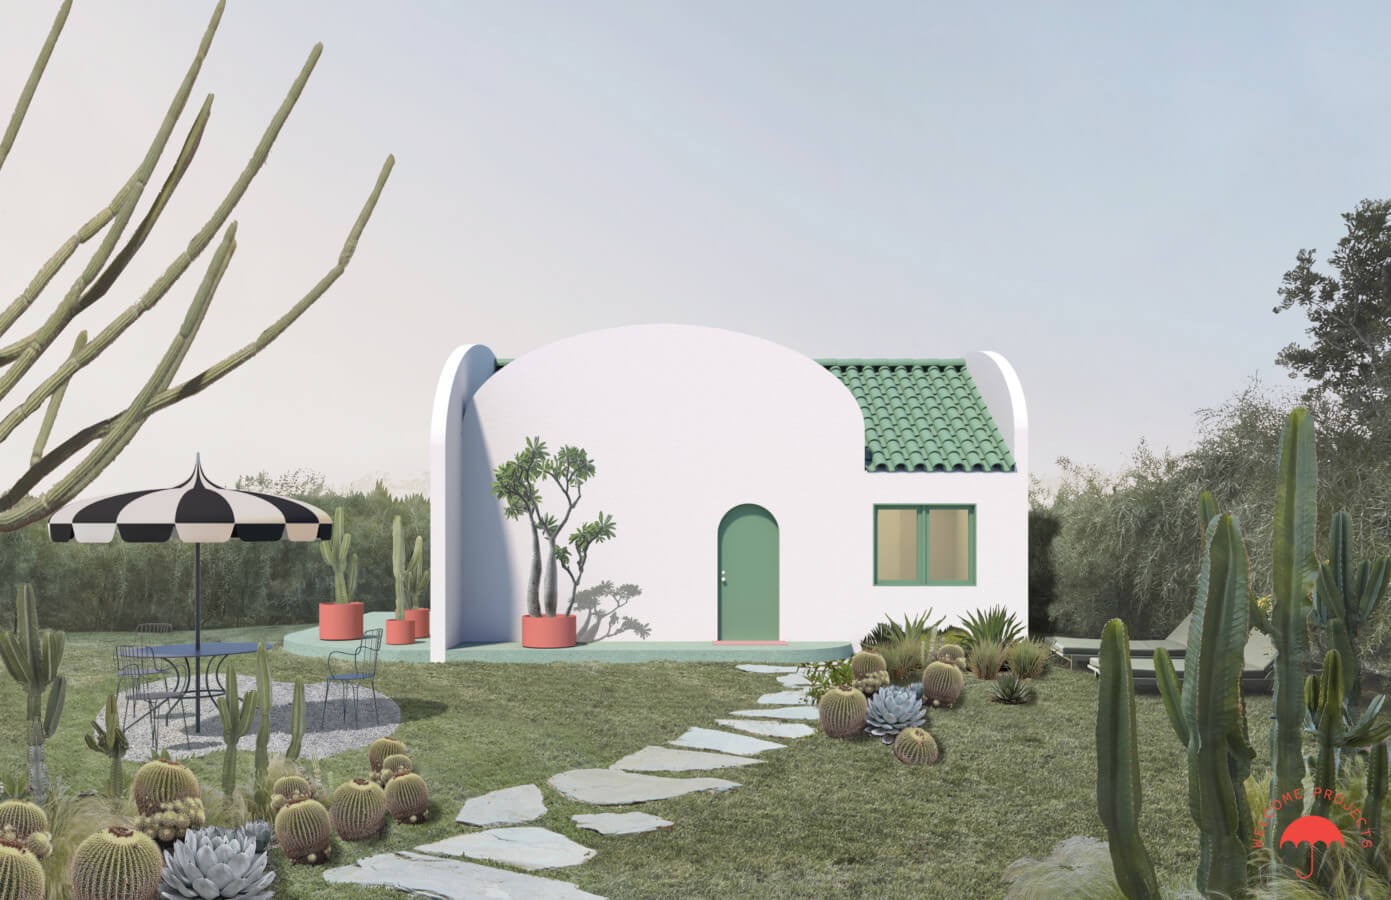 Prefabricated “Pebble House” For The Los Angeles Accessory Dwelling Units Scheme proposed by SO-IL - Sheet5